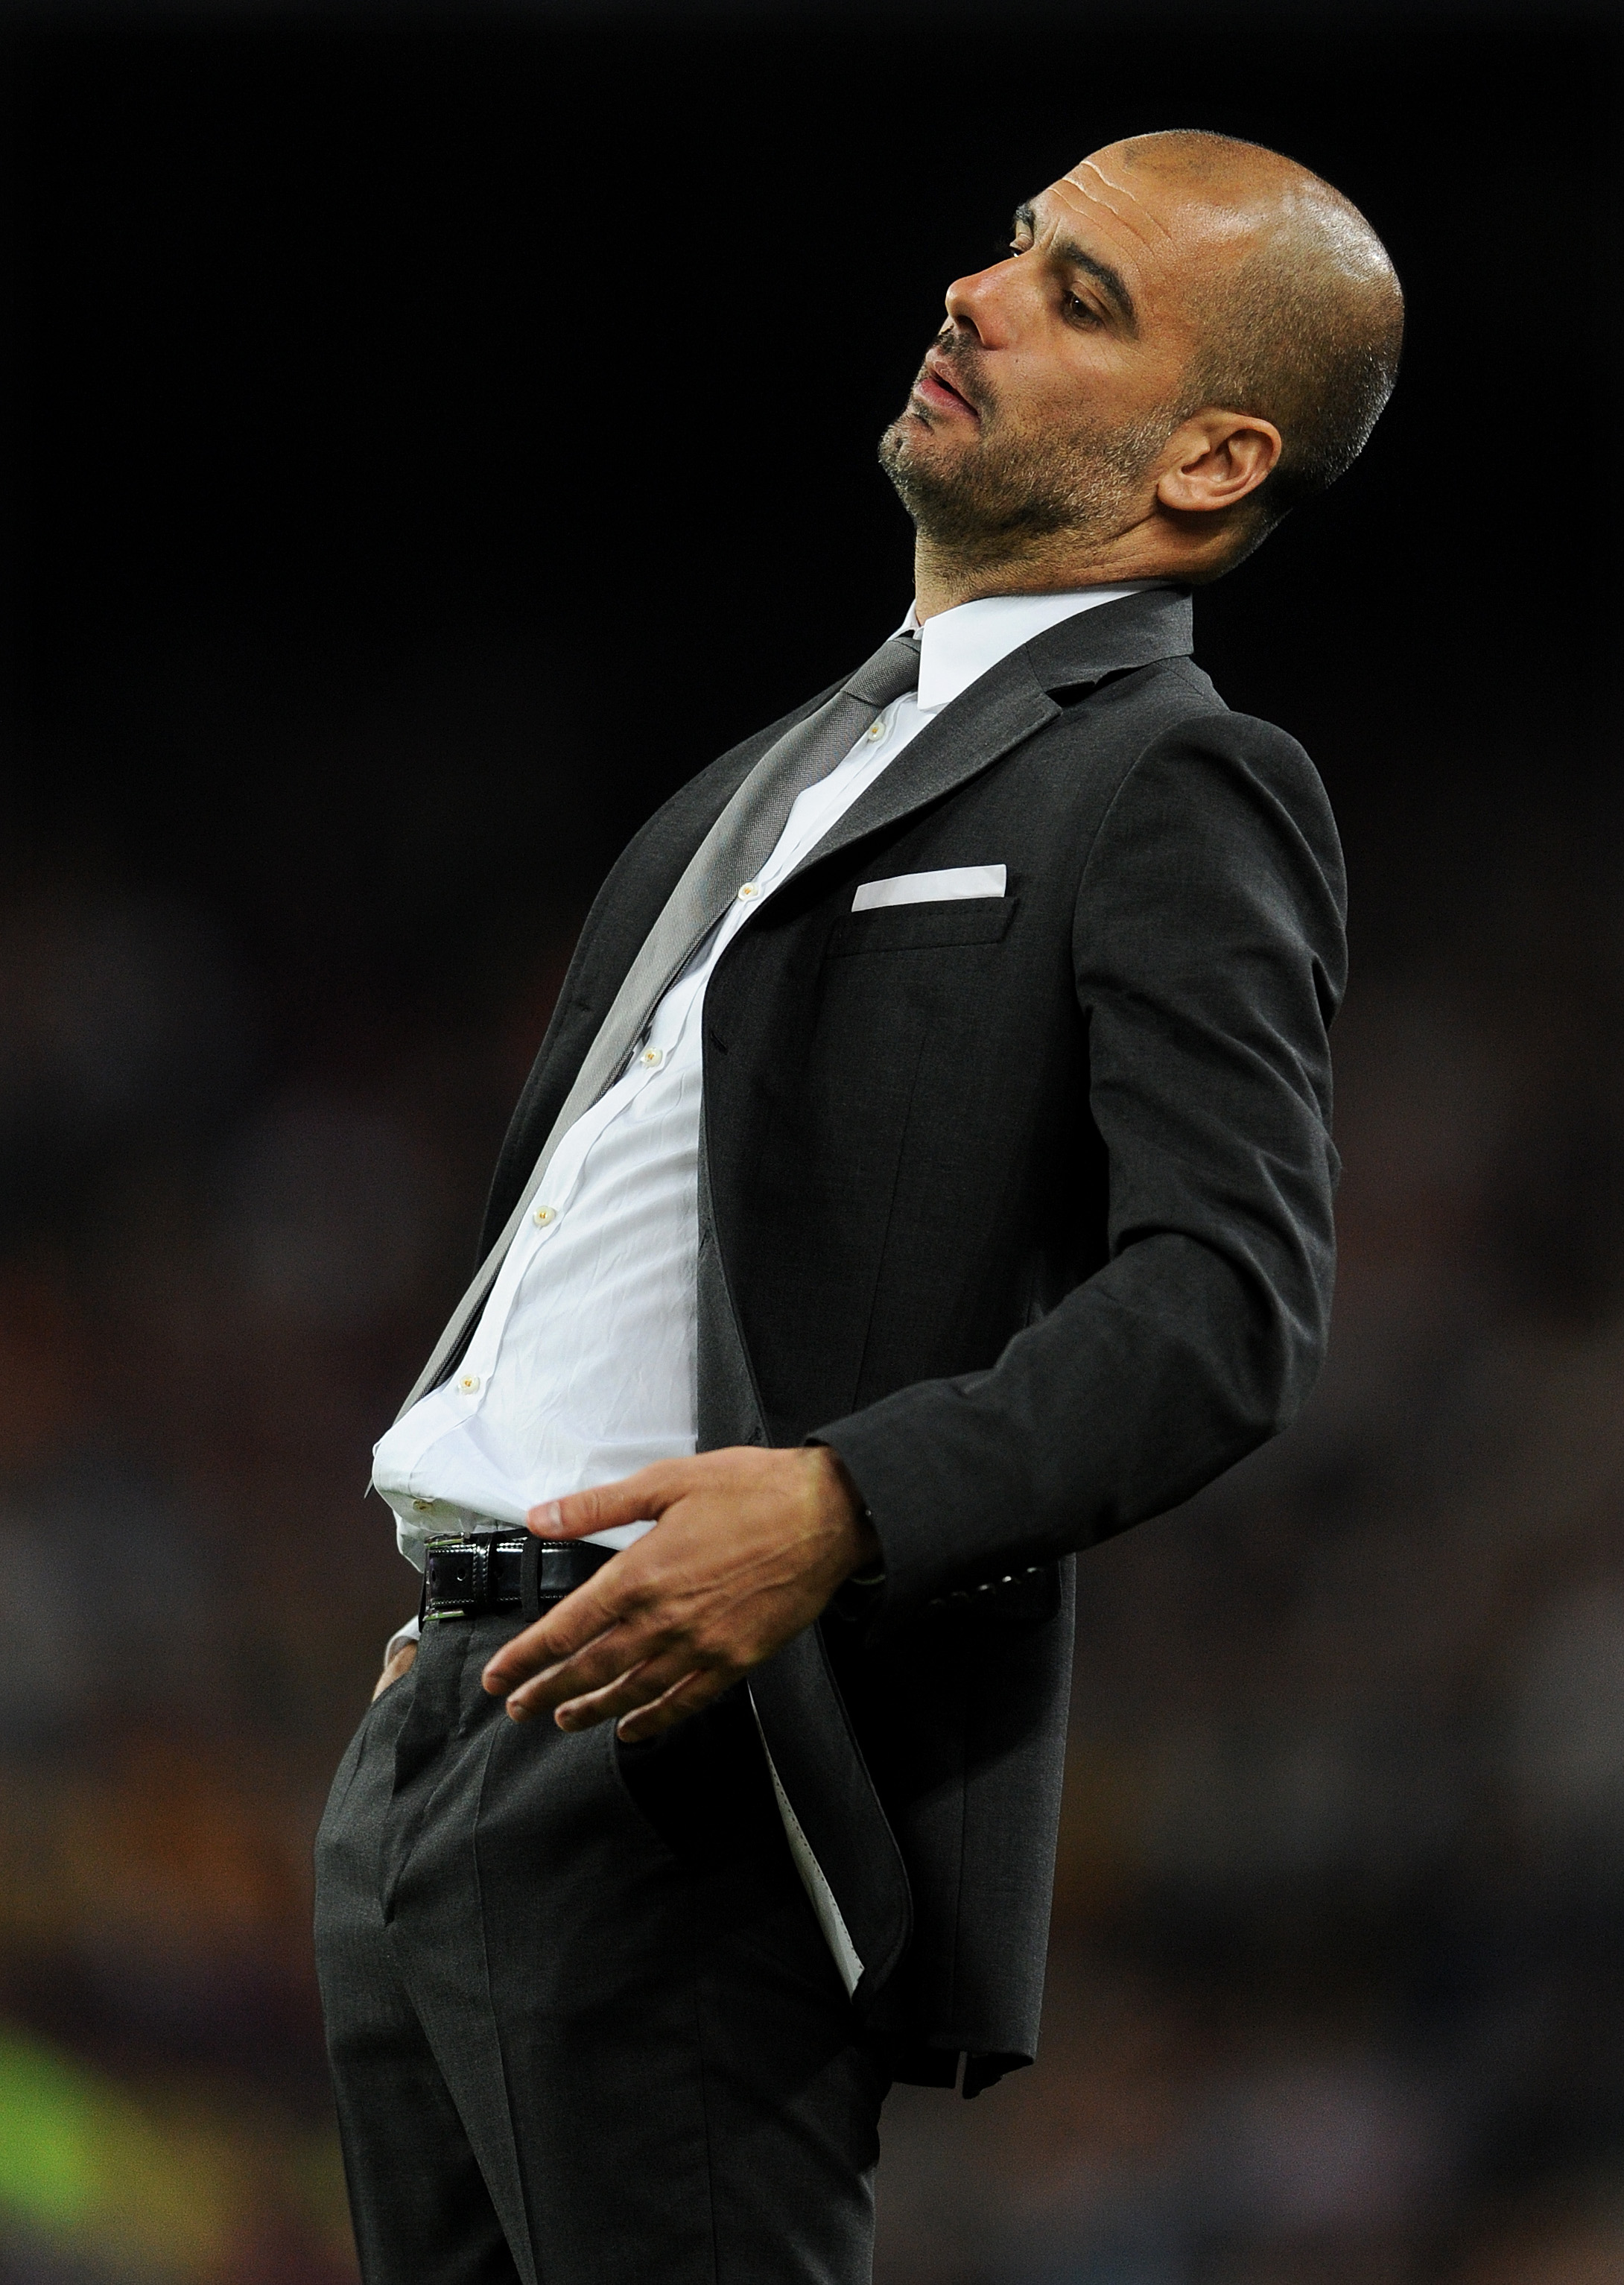 BARCELONA, SPAIN - APRIL 09:  Head coach Josep Guardiola of Barcelona reacts as he follows the game during the la Liga match between FC Barcelona and UD Almeria at the Camp Nou stadium on April 9, 2011 in Barcelona, Spain.  (Photo by Jasper Juinen/Getty I